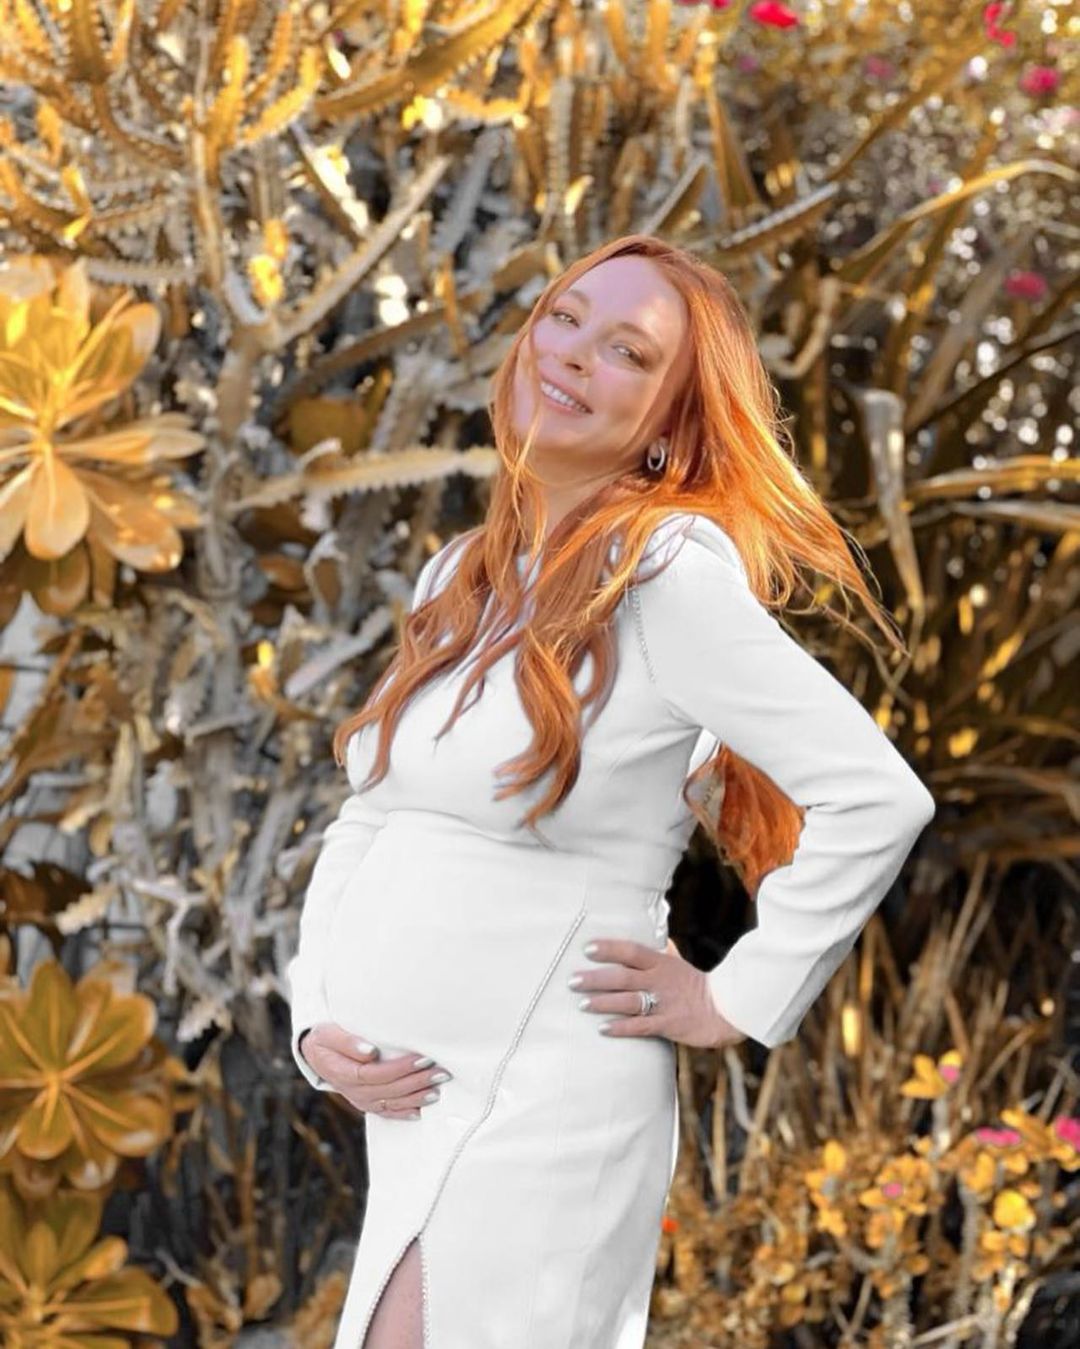 Photos n°5 : Lindsay Lohan Lays Back With Her Growing Bump!